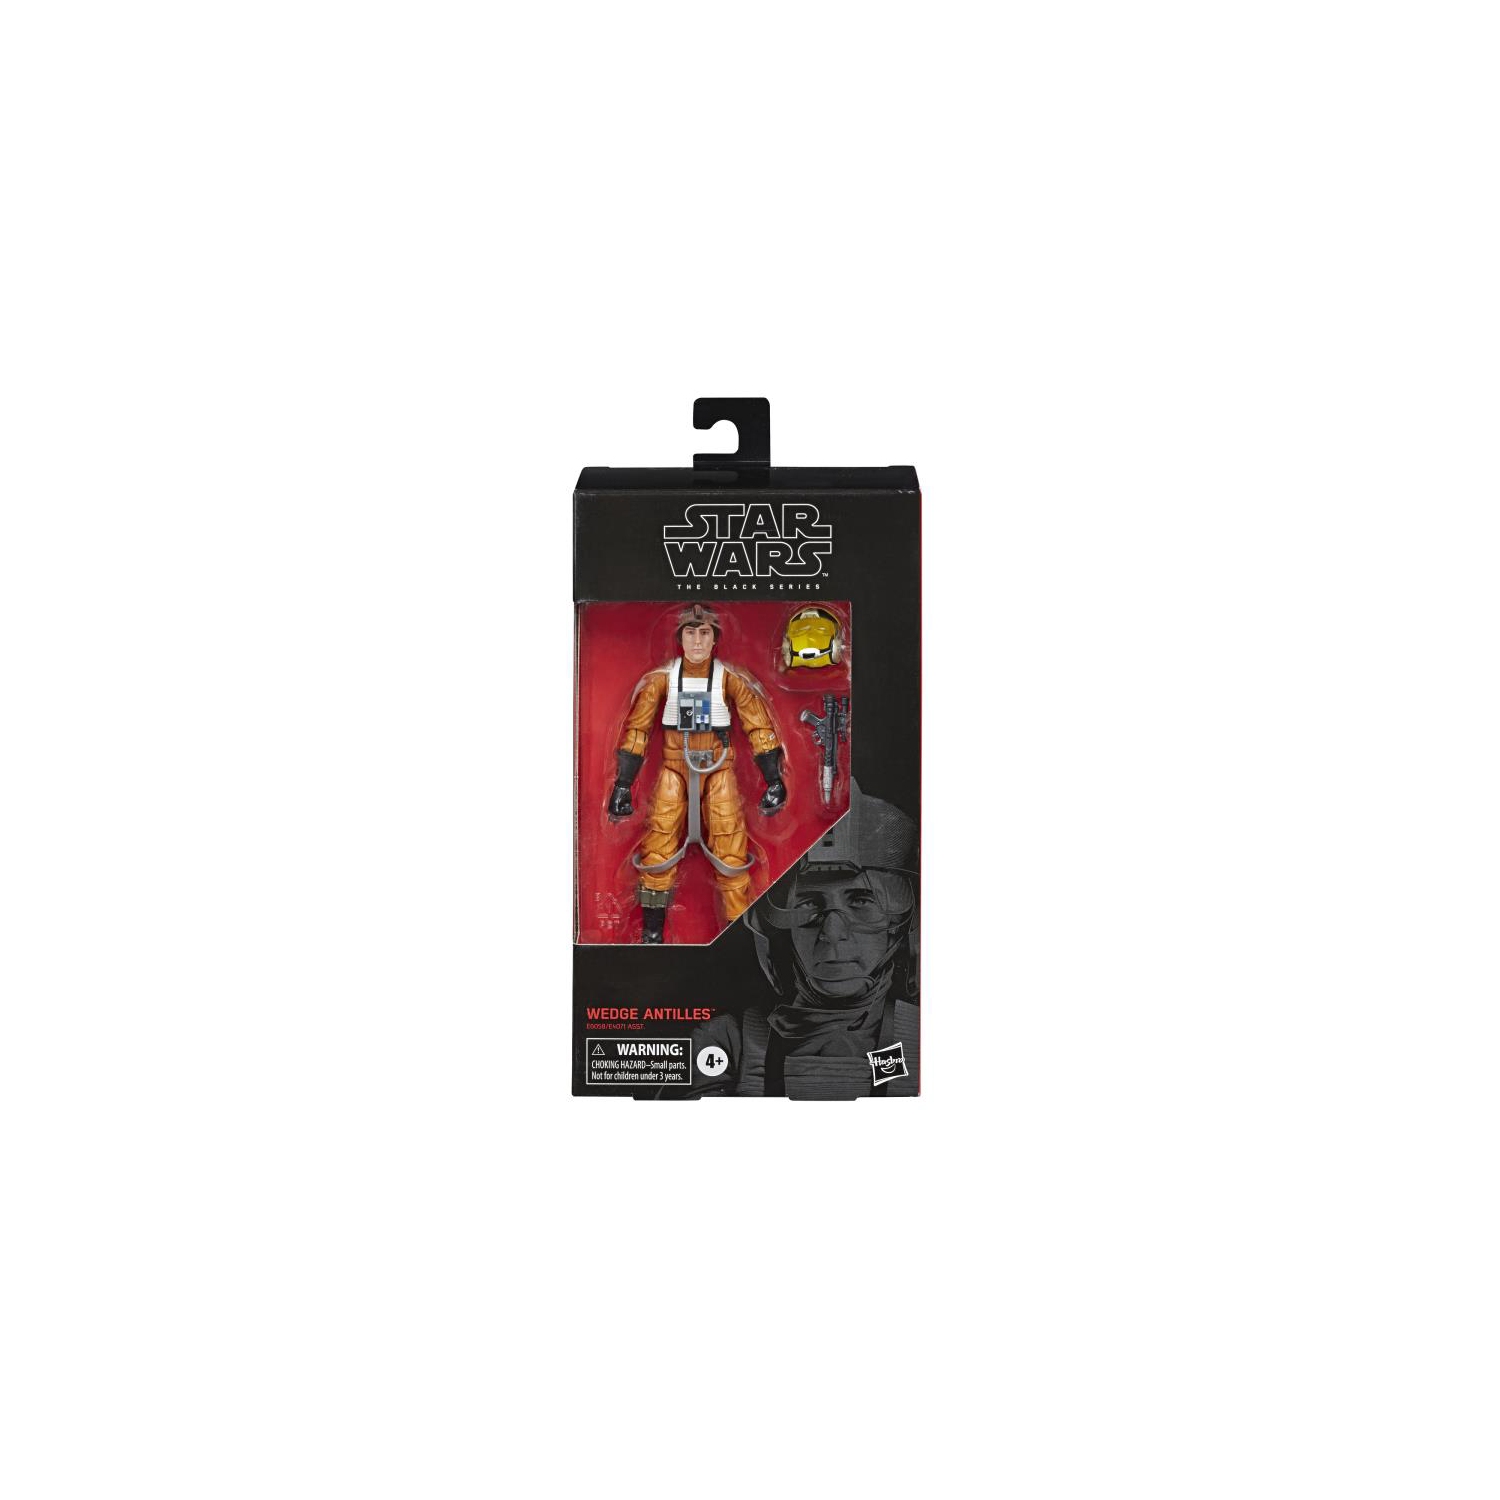 Star Wars The Black Series 6 Inch Action Figure Wave 34 - Wedge Antilles #102